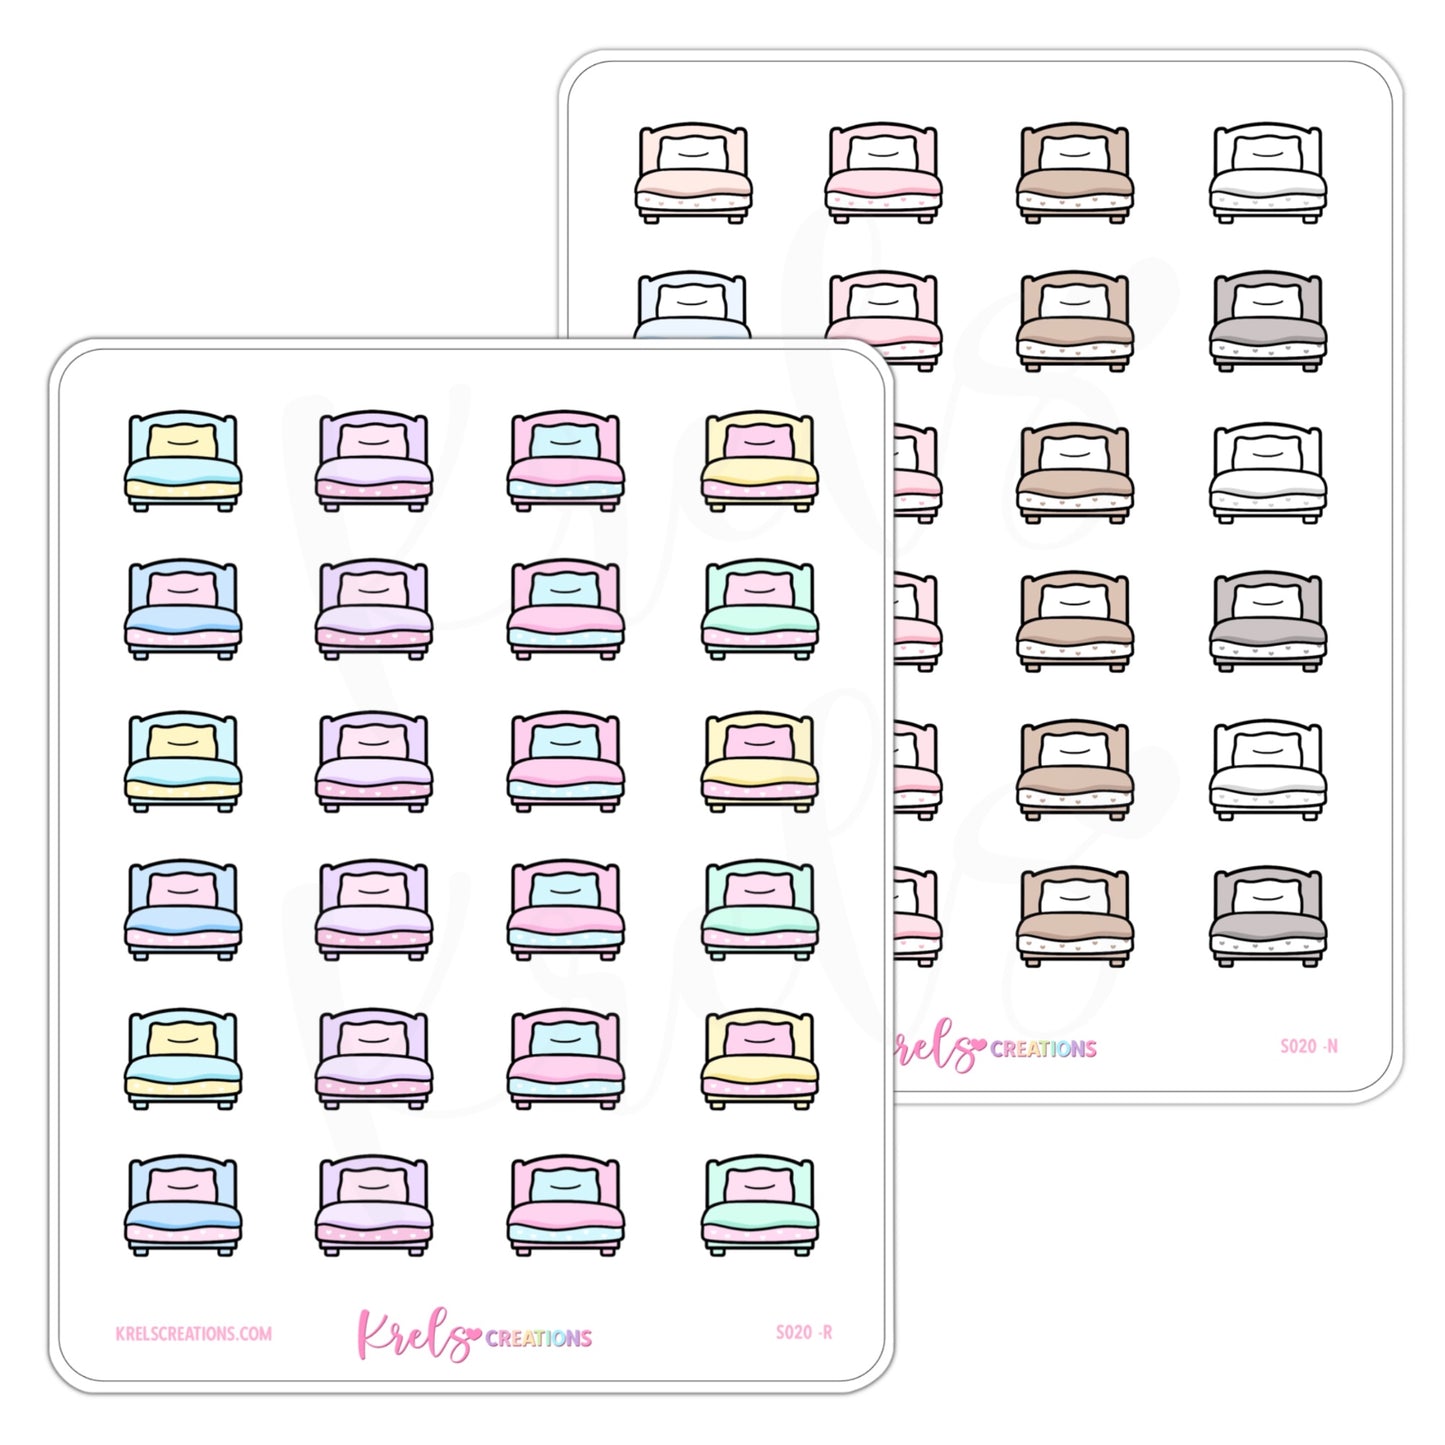 S020 | Bed Stickers